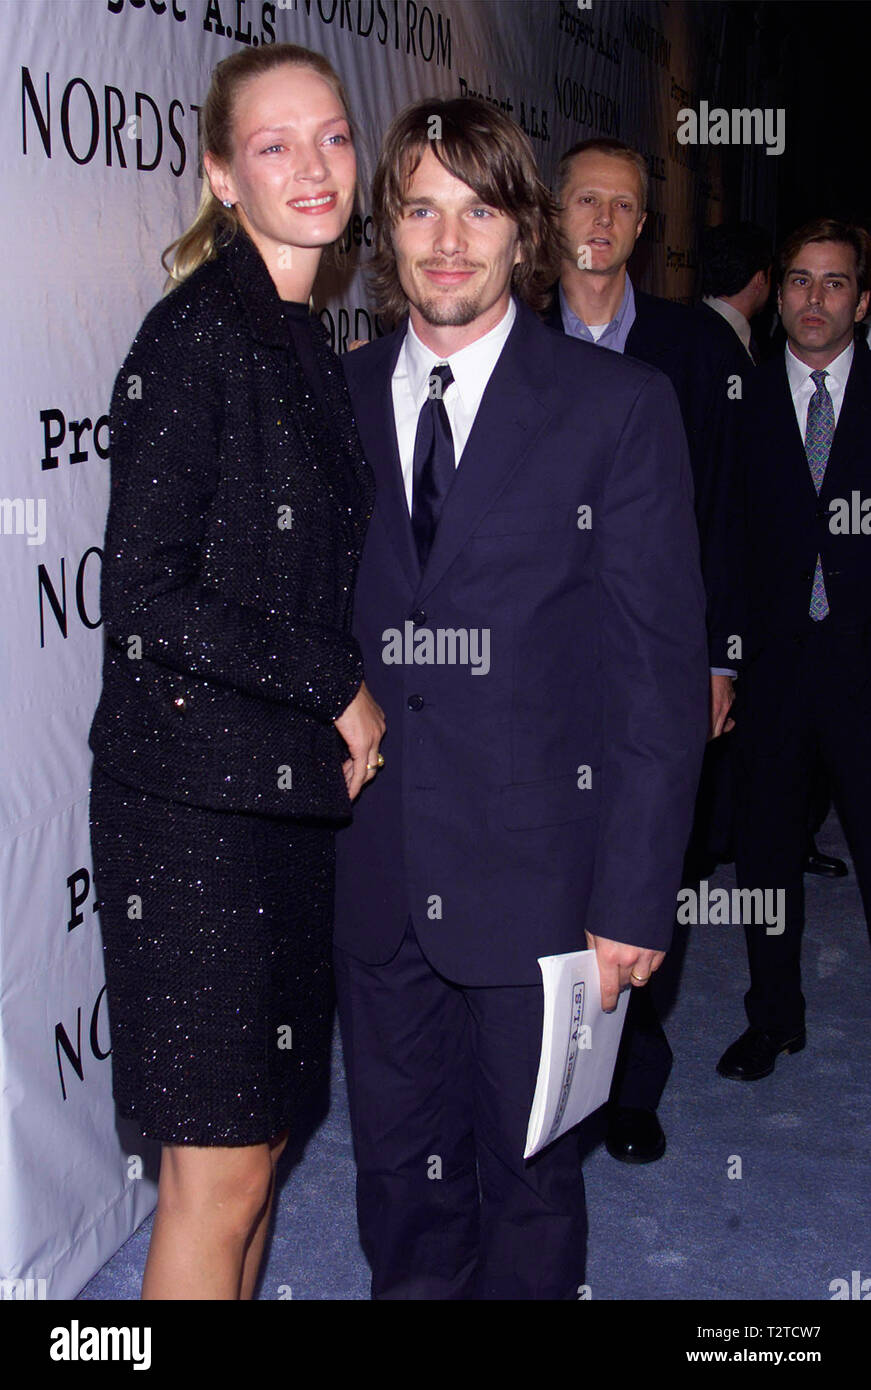 NEW YORK, NY. October 02, 2000: Actress UMA THURMAN & actor husband ETHAN  HAWKE at the Tomorrow Is Tonight gala in New York to raise funds for  Project A.L.S. (Amyotrophic Lateral Sclerosis).